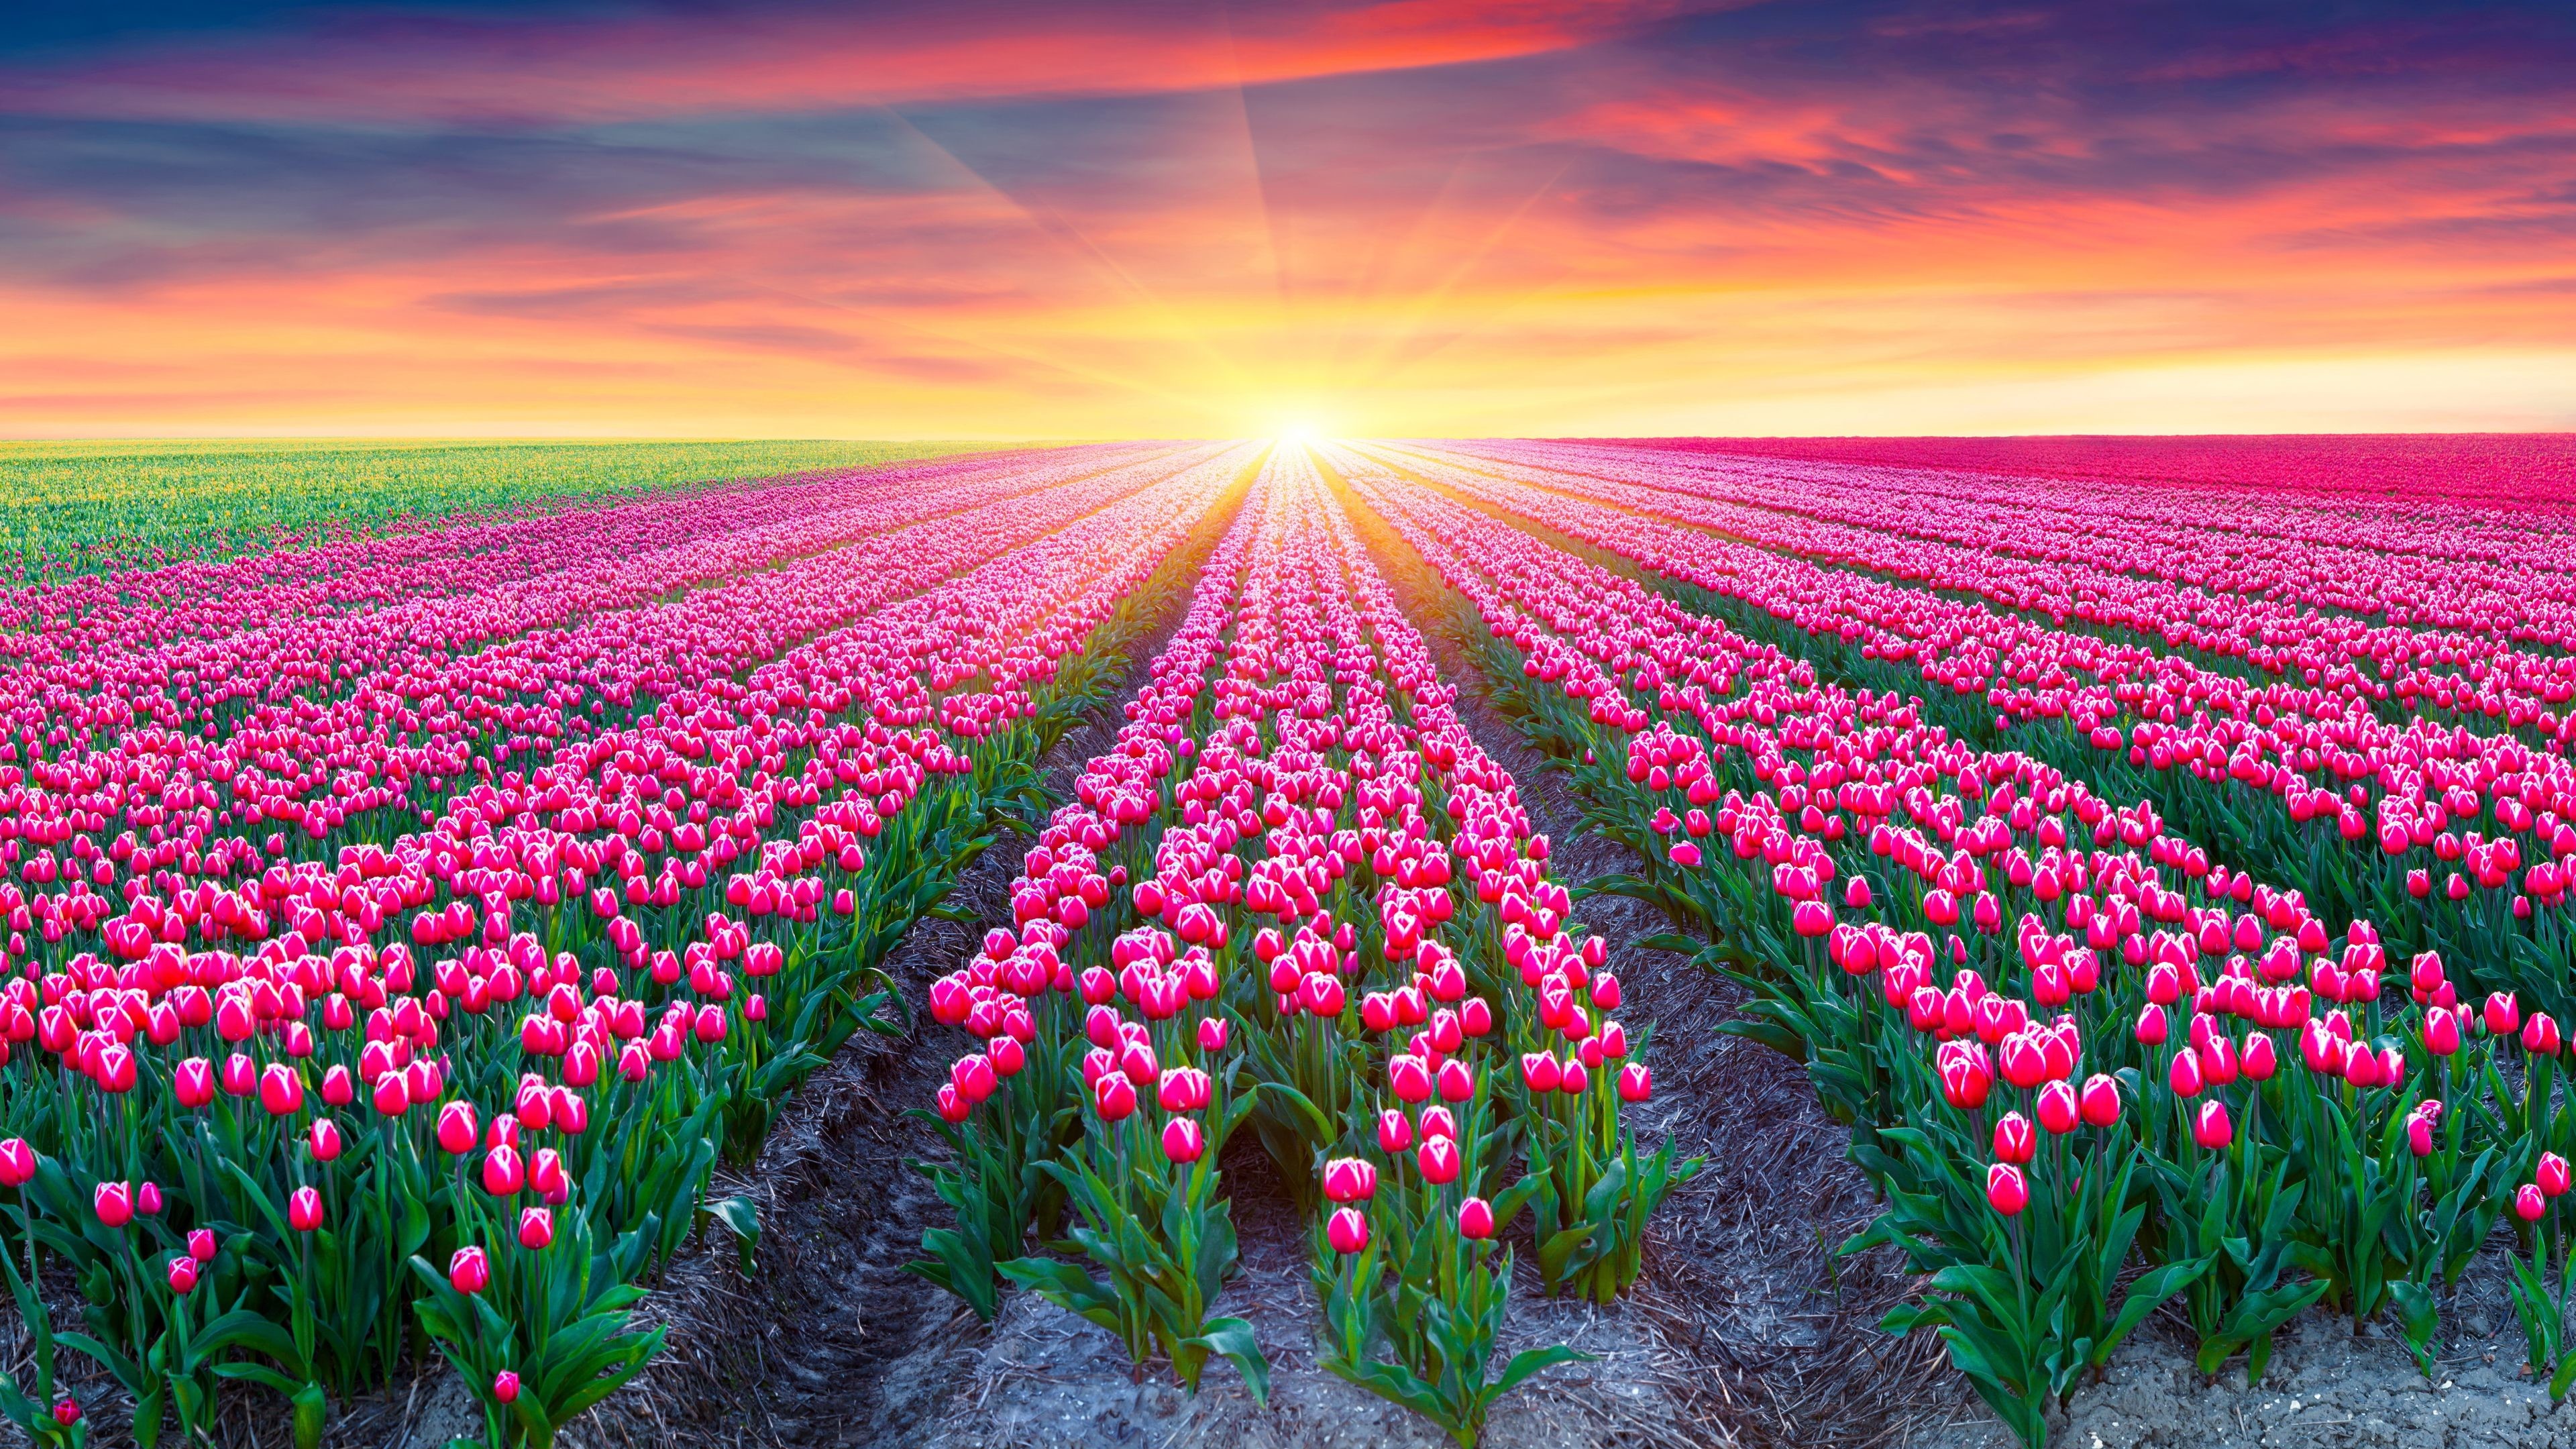 Field Of Flowers Wallpaper (58+ images)